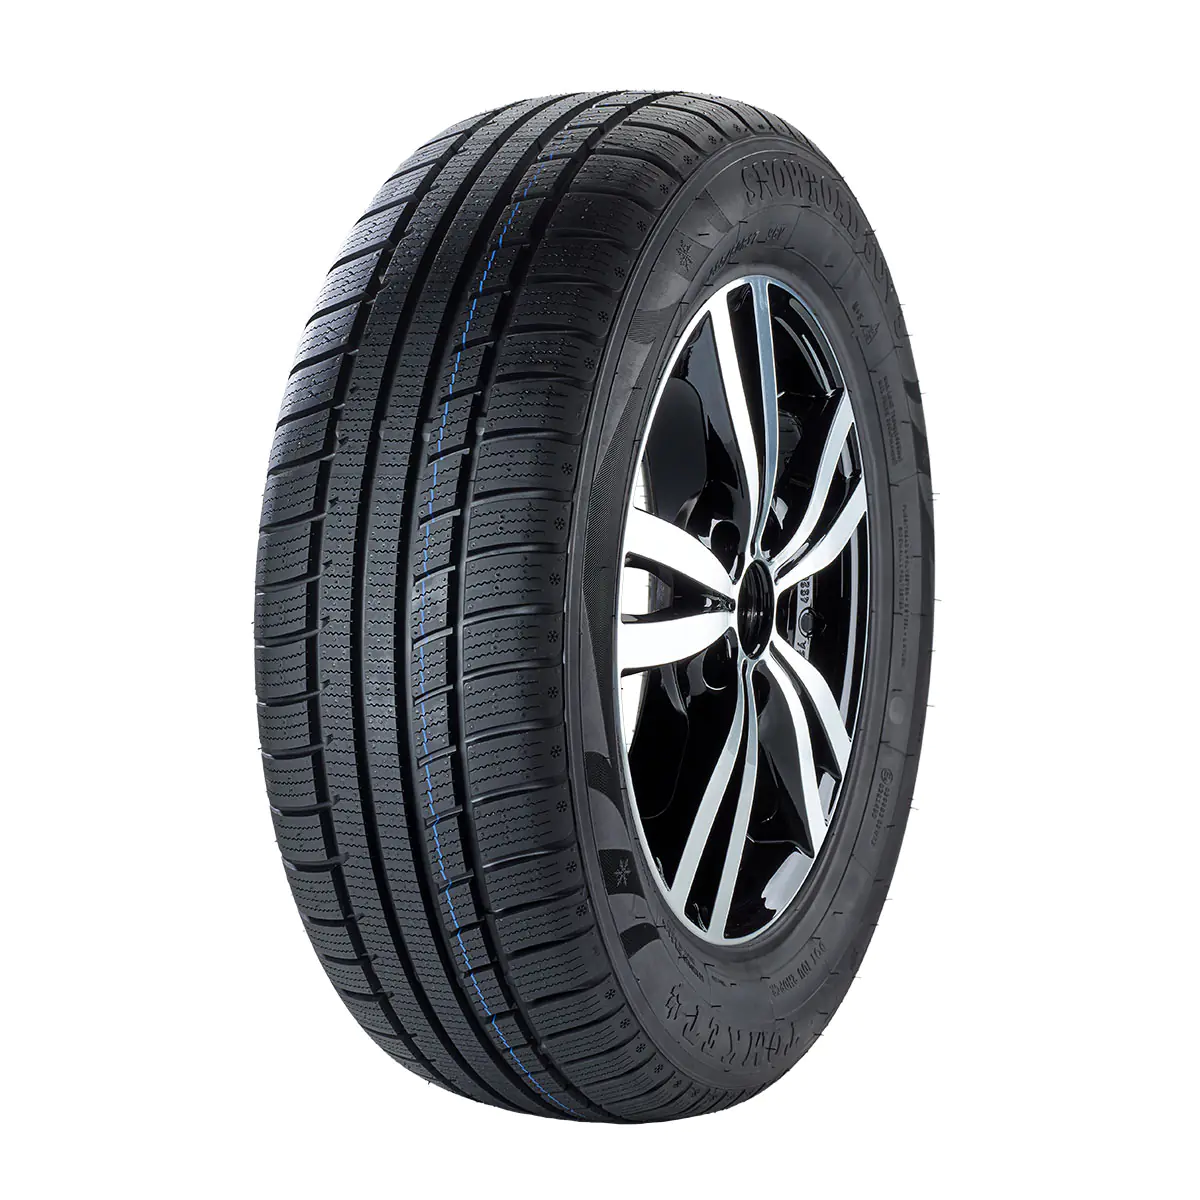 Gomme 4x4 Suv Tomket 235/65 R17 108V SNOWROAD SUV 3 XL M+S Invernale